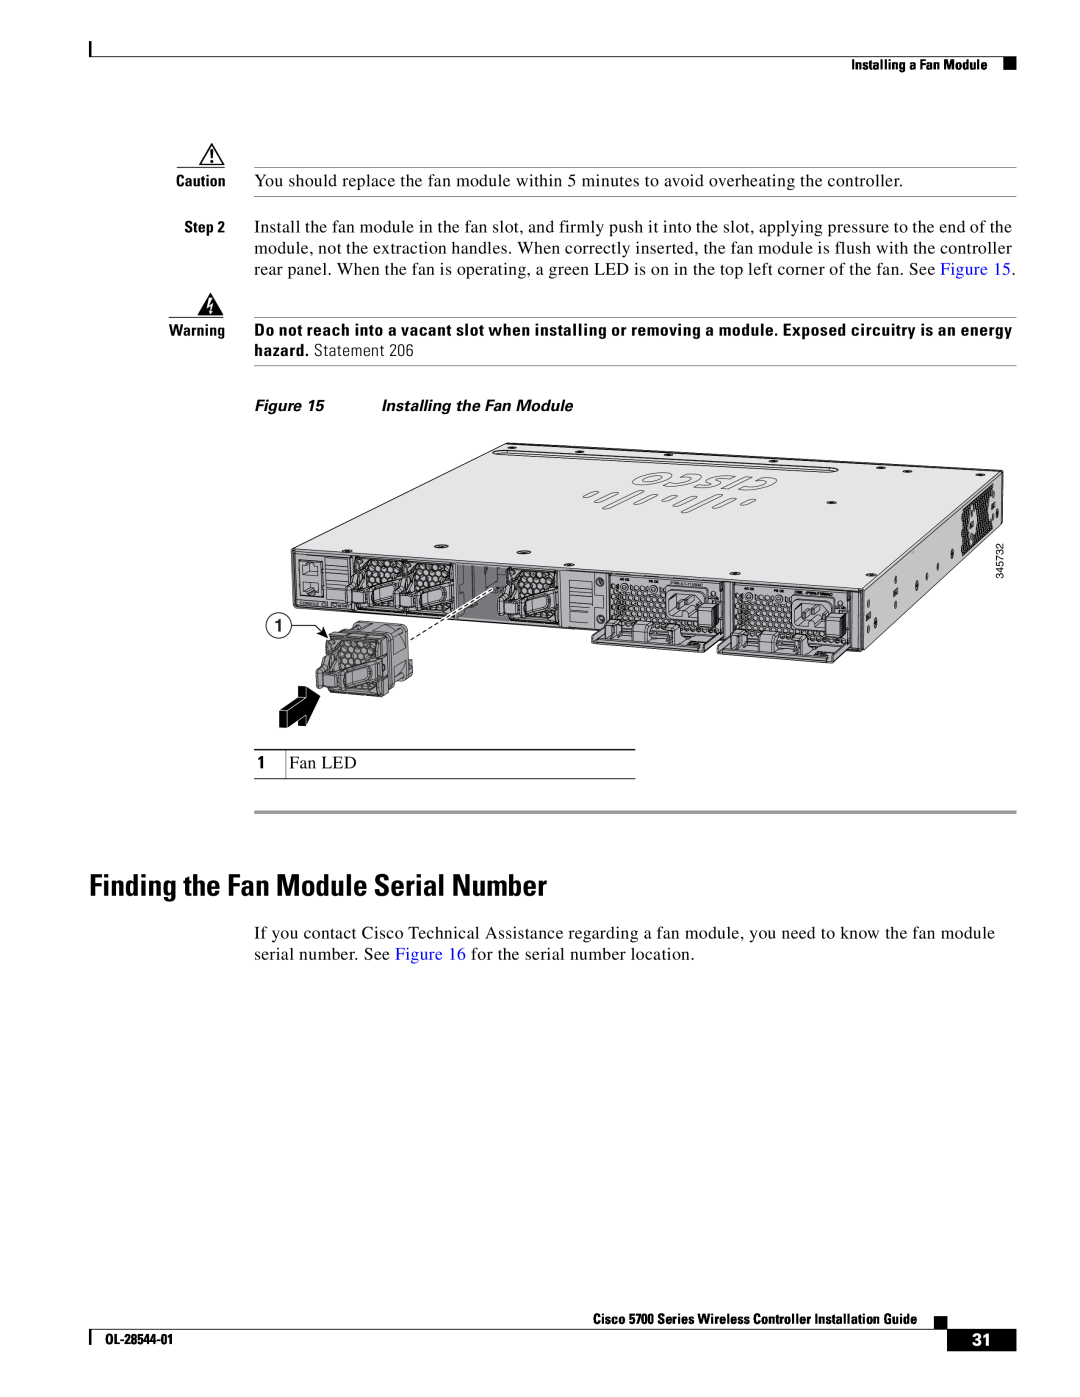 Cisco Systems AIRCT576025K9, AIRCT5760HAK9 specifications Finding the Fan Module Serial Number 